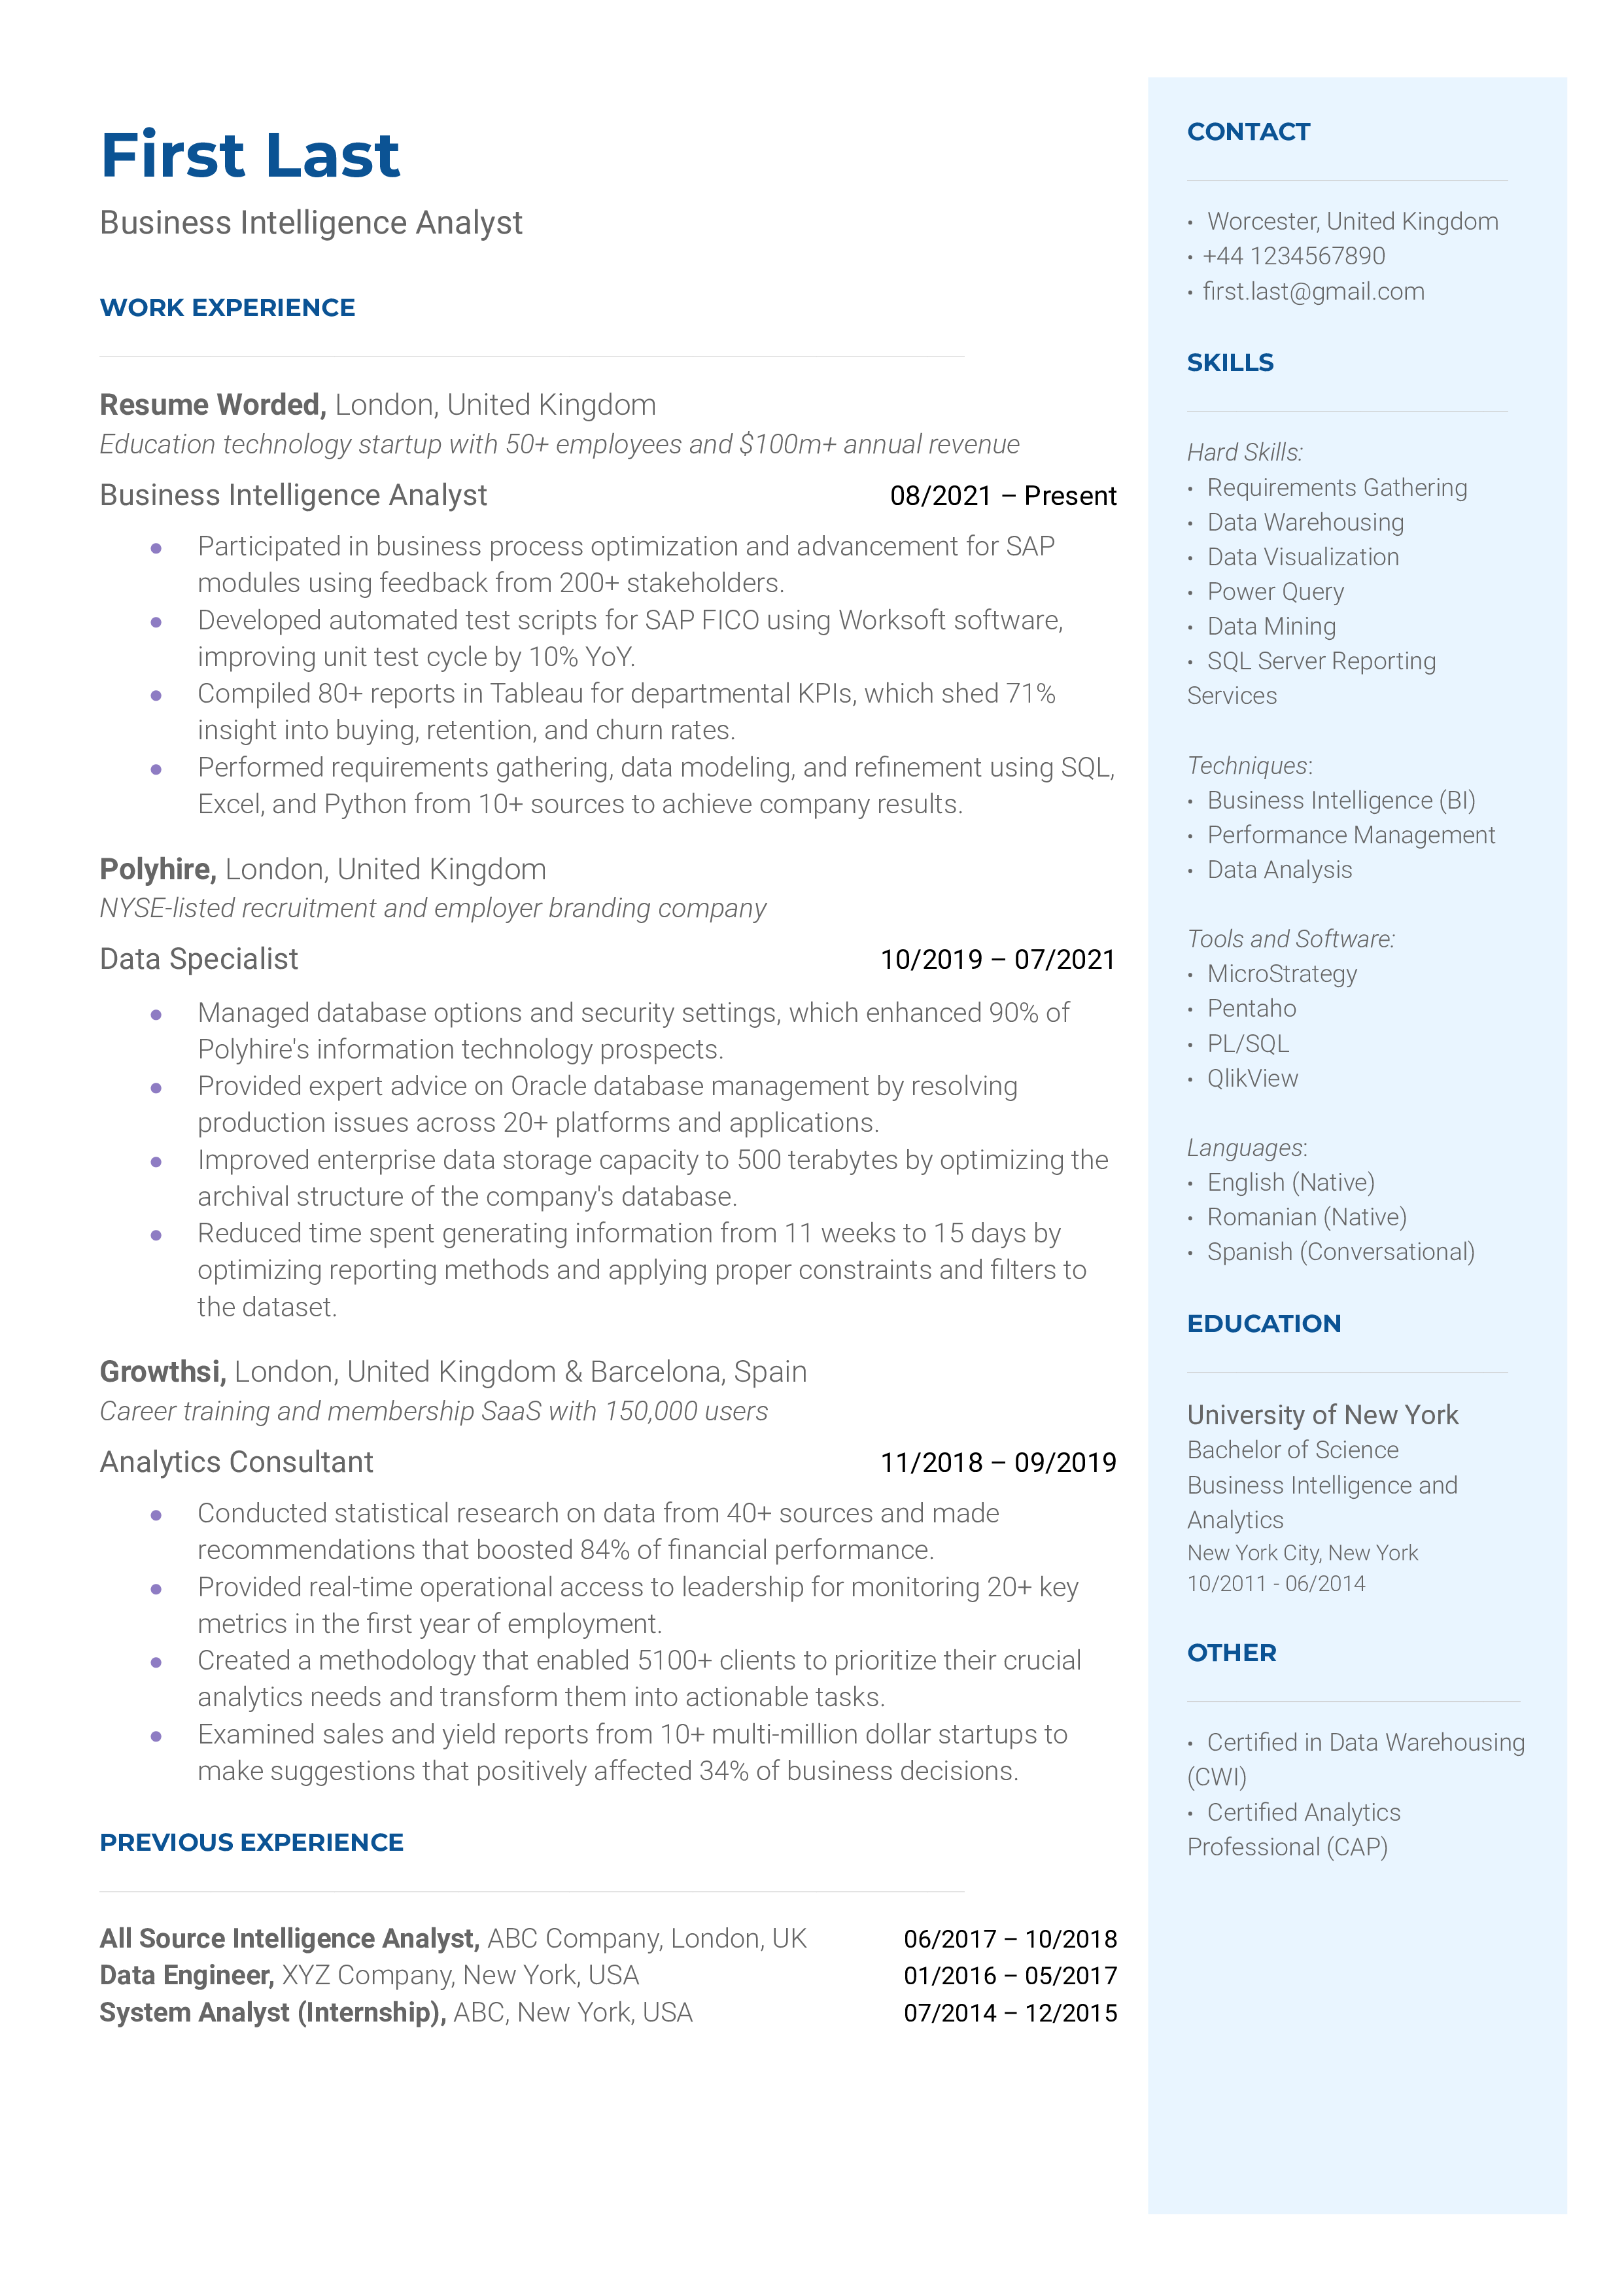 A Business Intelligence Analyst resume emphasizing experience in analyzing data, creating reports, and providing insights to support informed decision-making processes, utilizing advanced BI tools and techniques